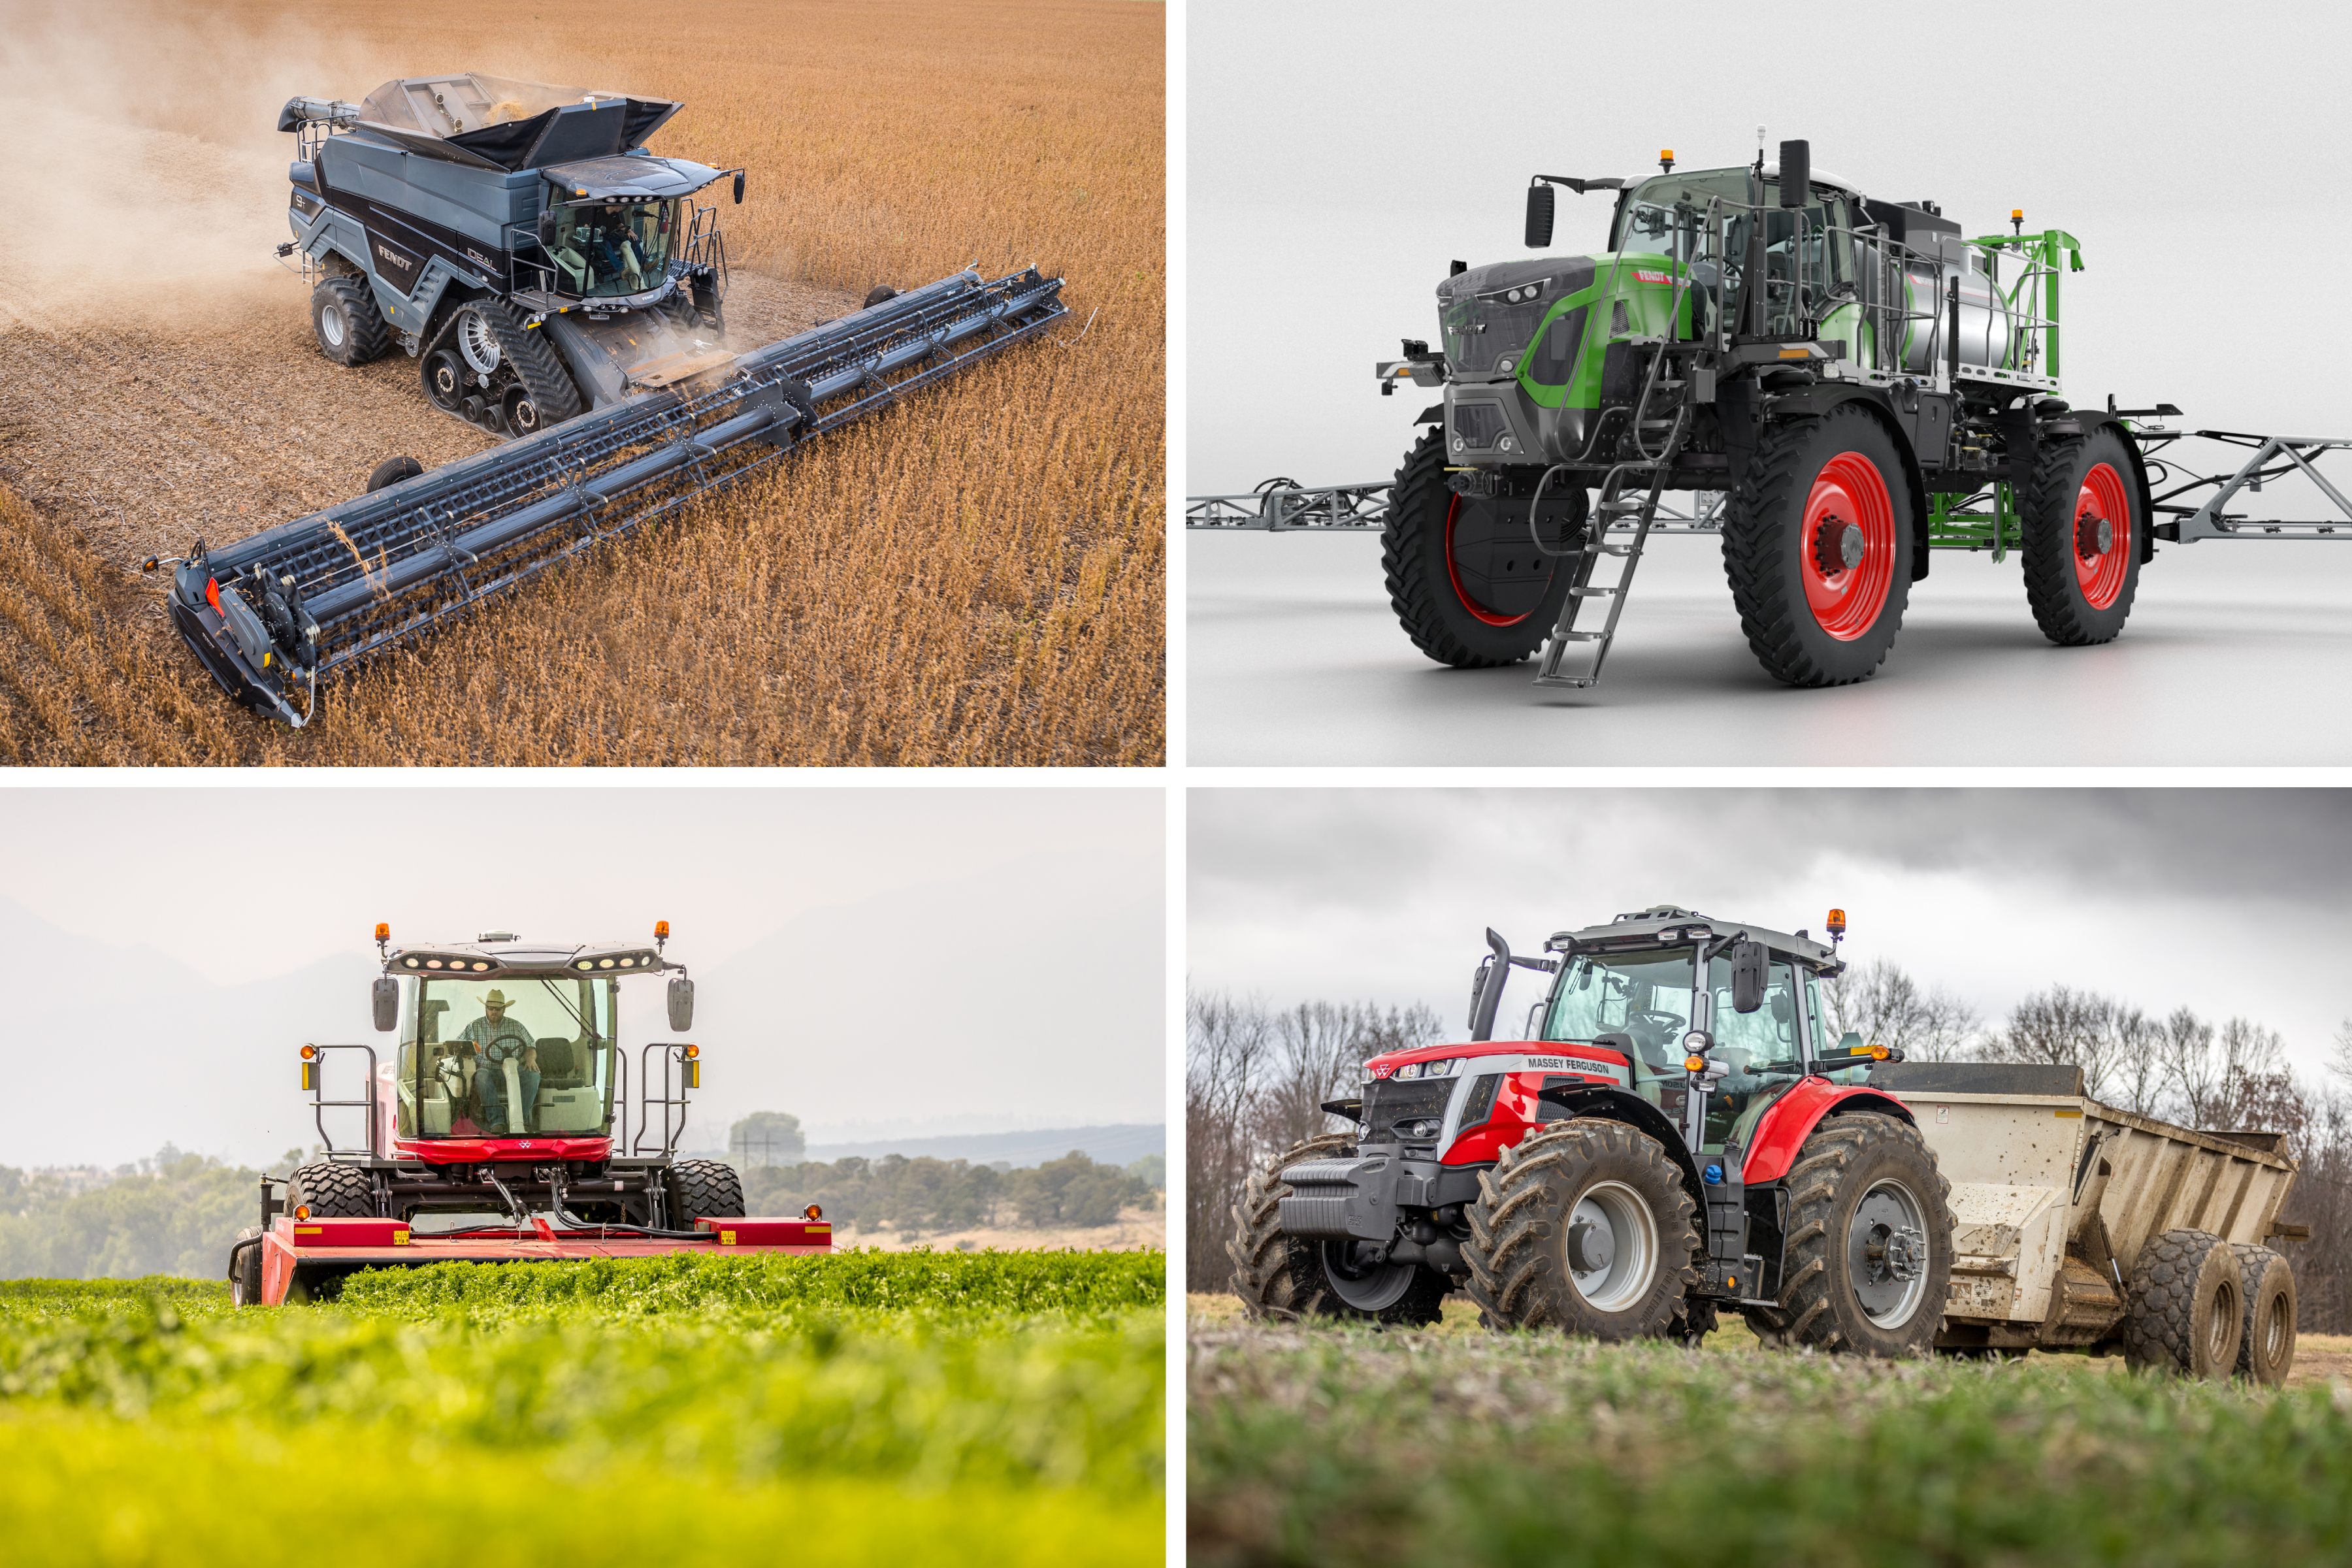 AGCO and AgRevolution to Showcase New Solutions from Fendt®, Massey Ferguson®, and Hesston by Massey Ferguson® at 2022 NFMS